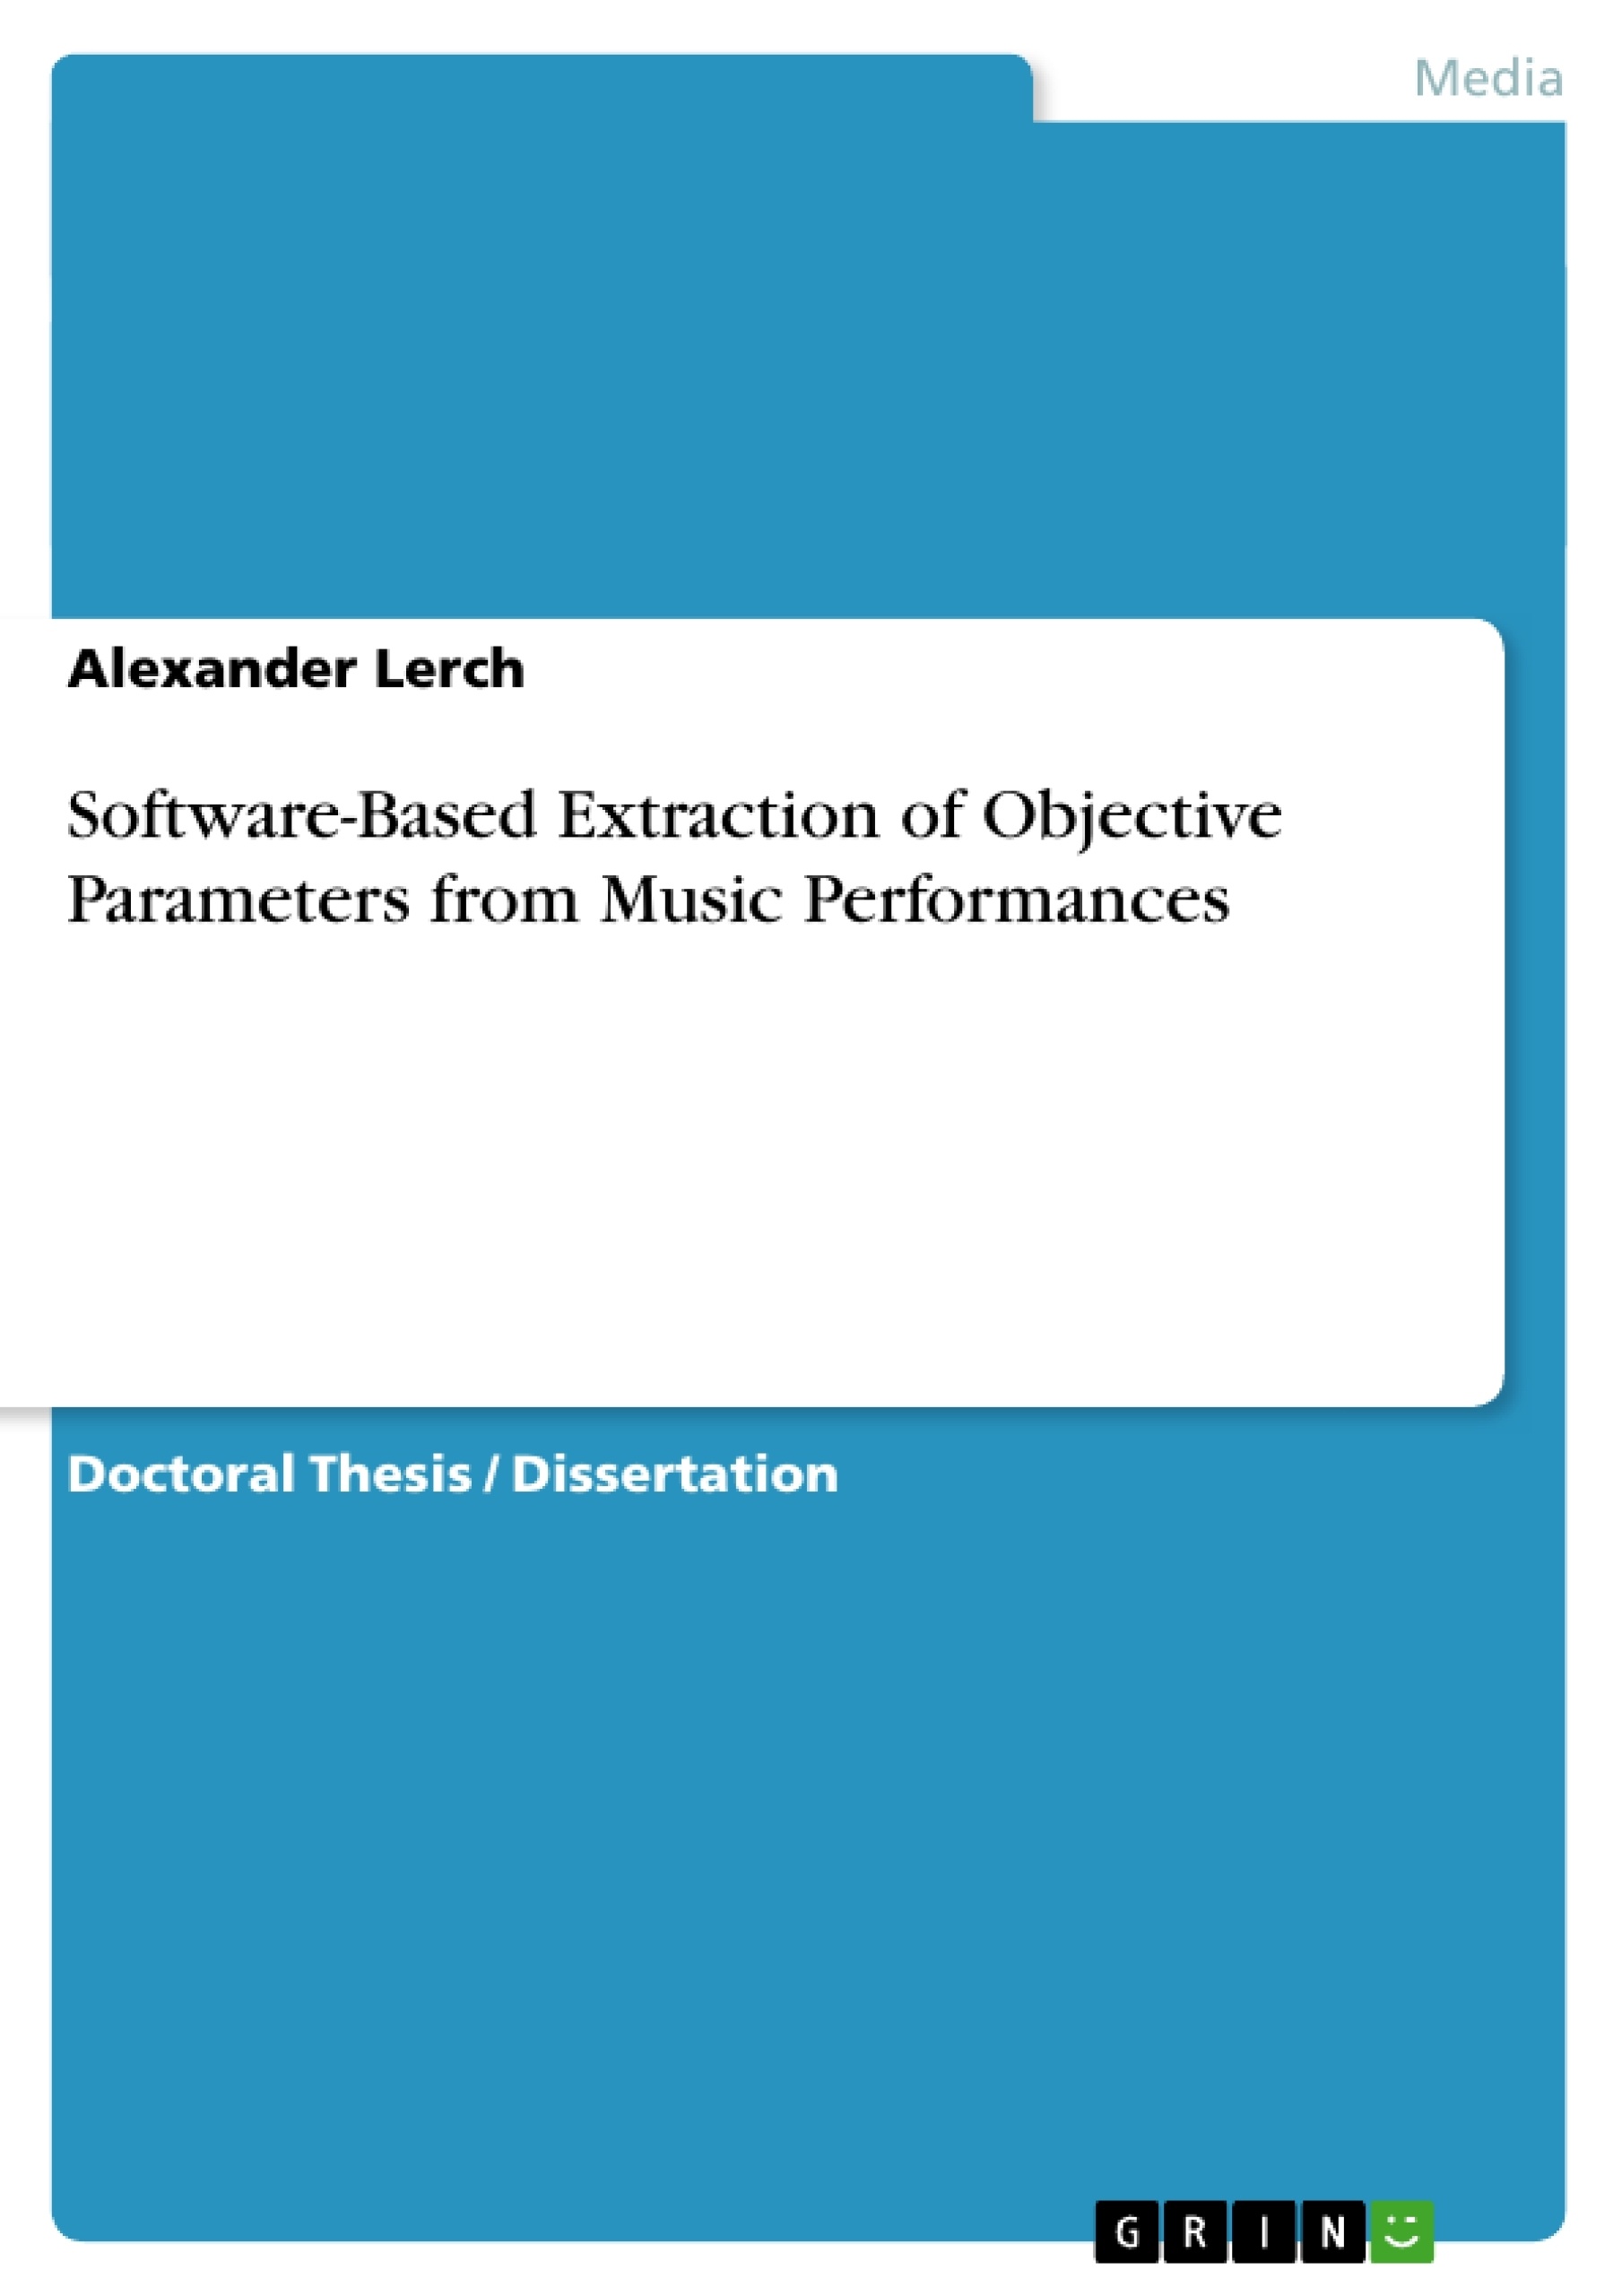 Título: Software-Based Extraction of Objective Parameters from Music Performances